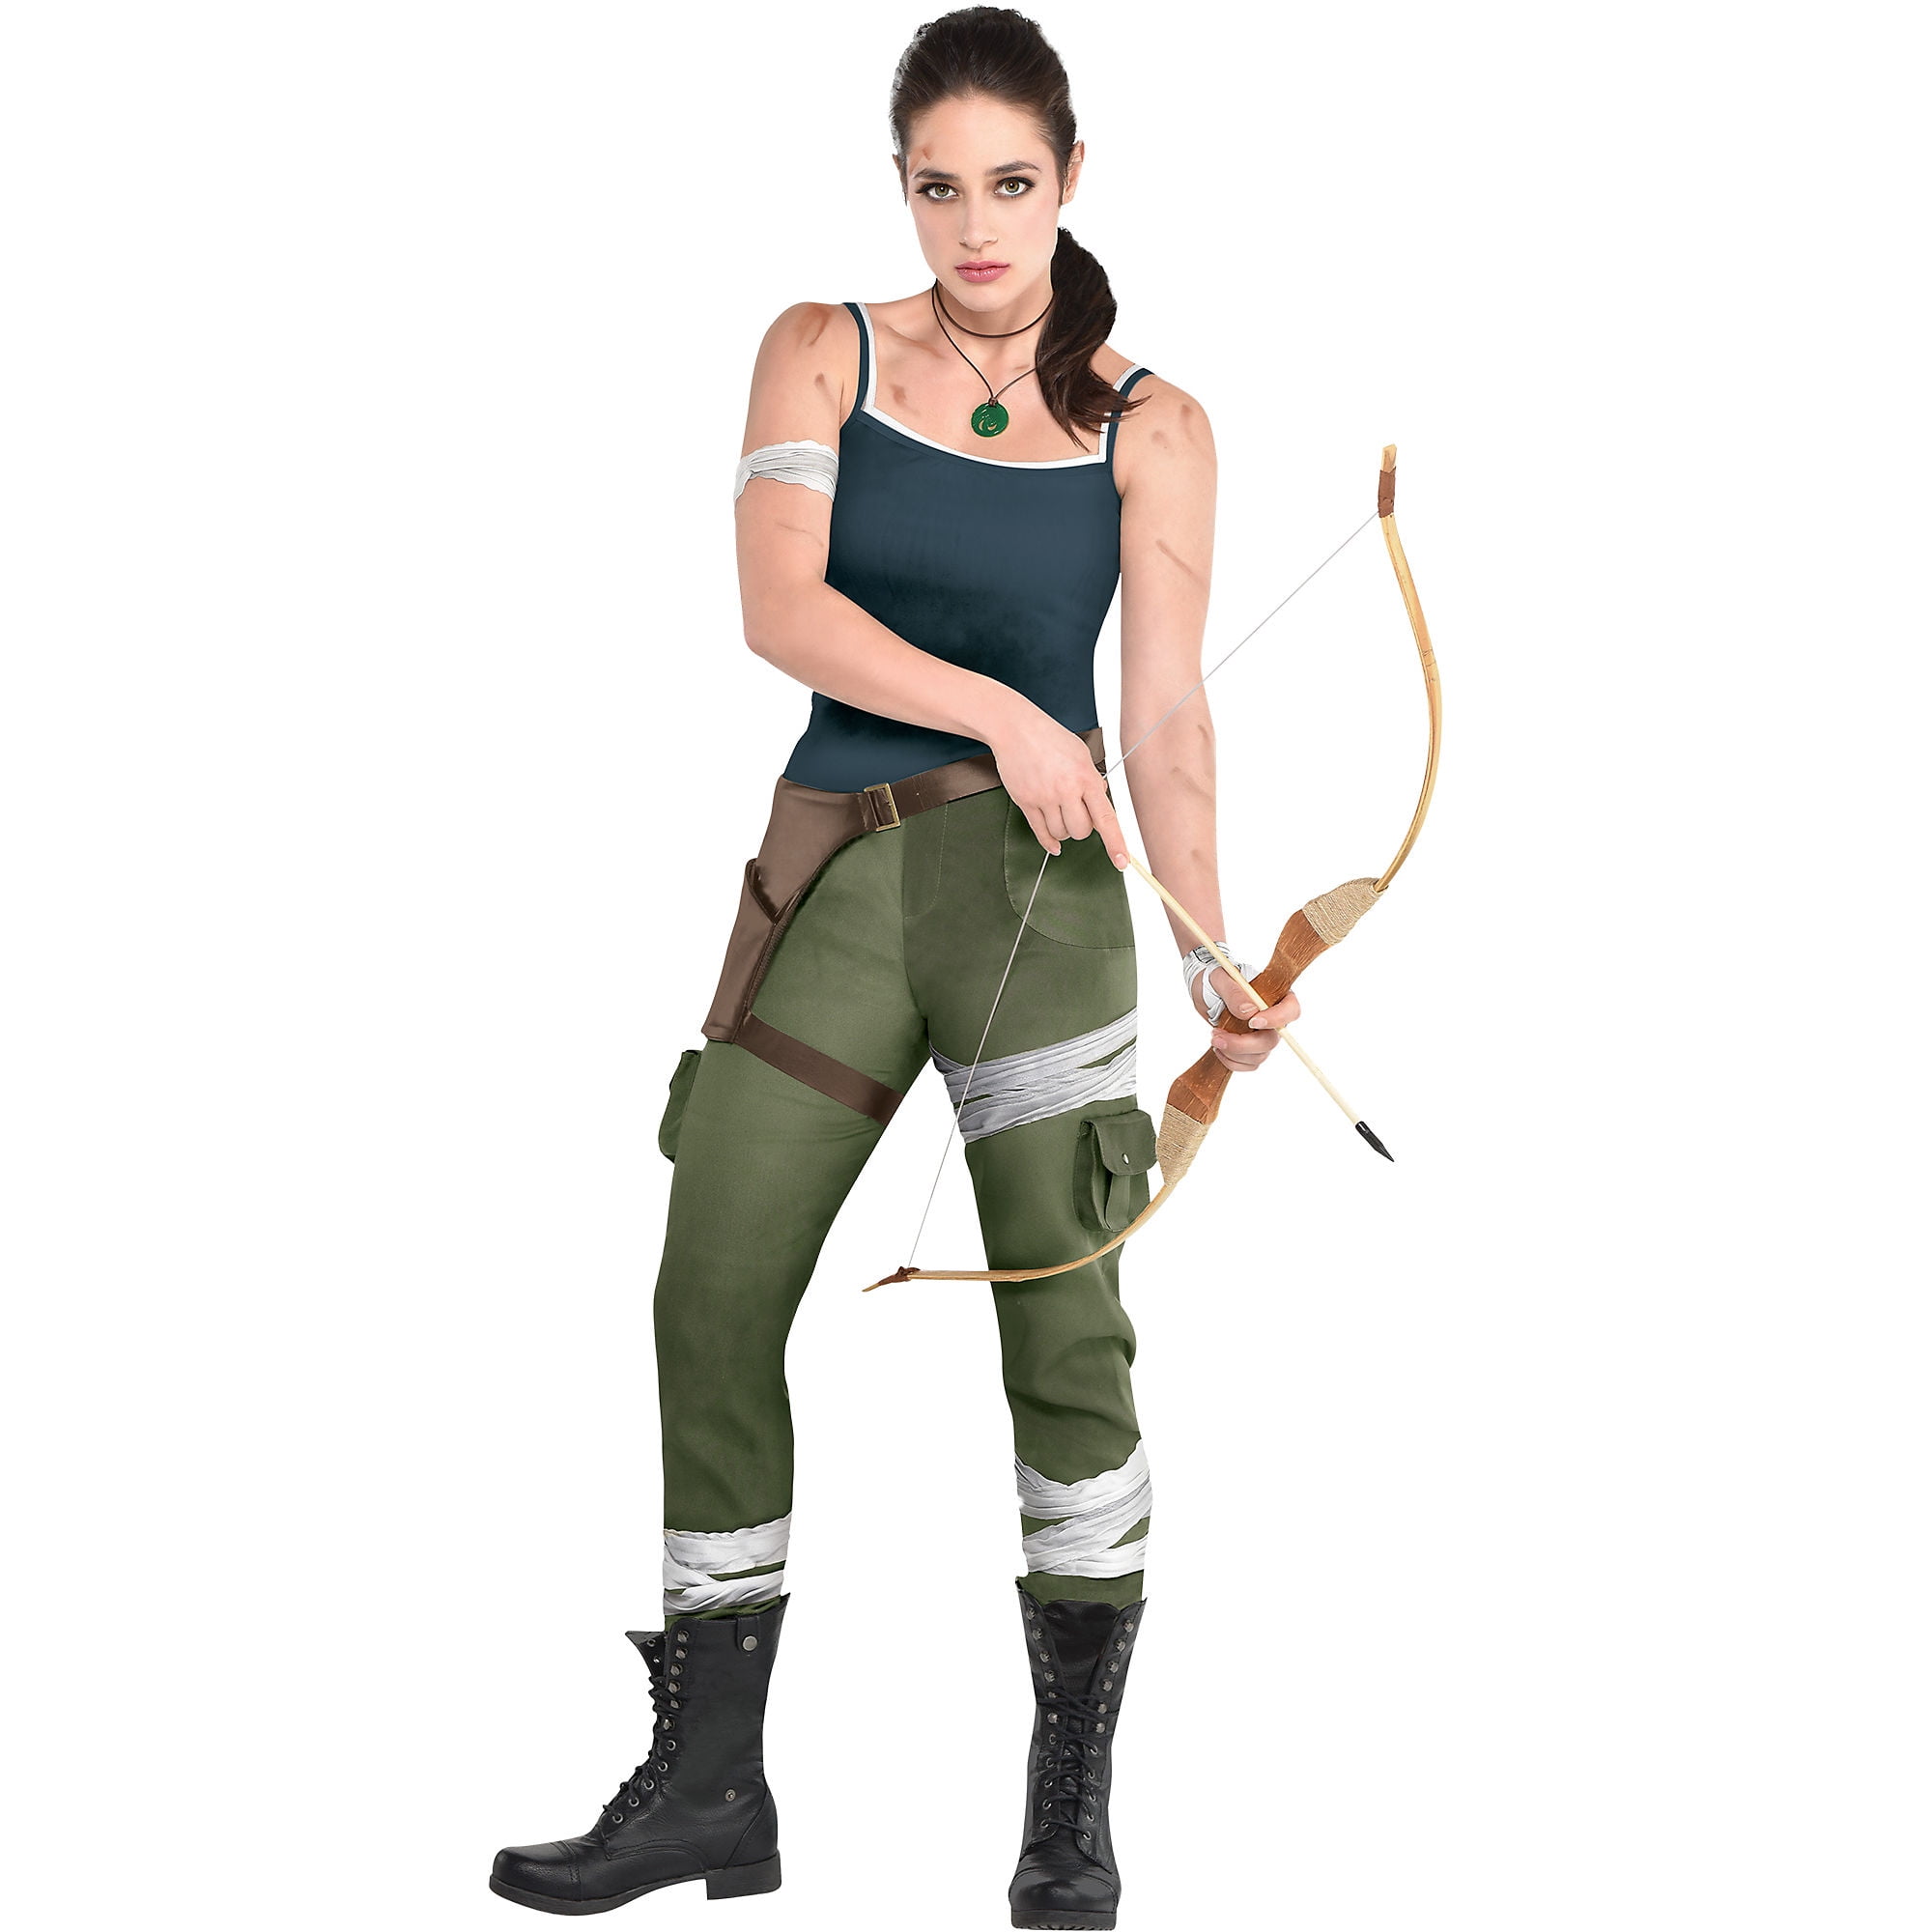 Party City Tomb Raider Video Game Lara Croft Costume for Adults ...